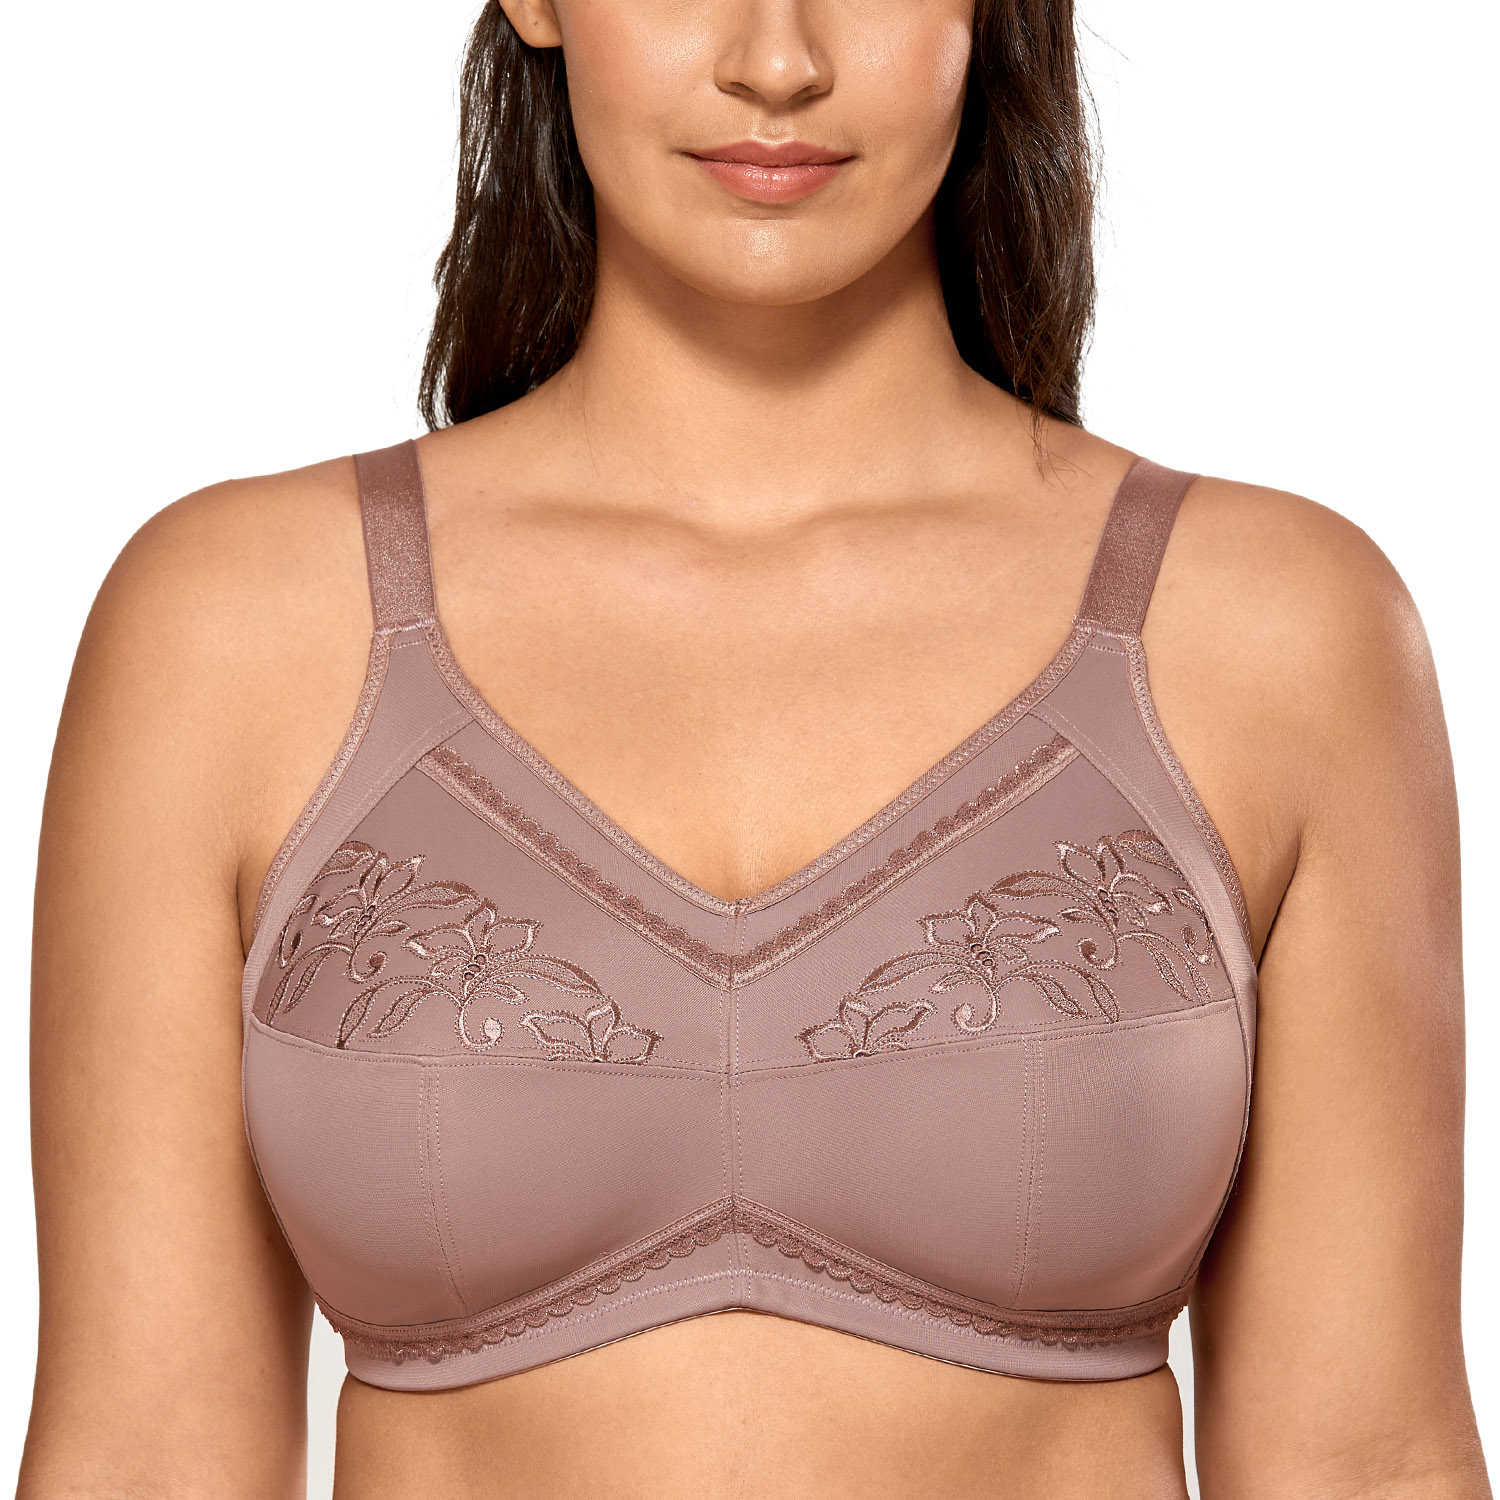 DELIMIRA Women Mastectomy Pocket Bra Embroidered Full Coverage Support  Wirefree